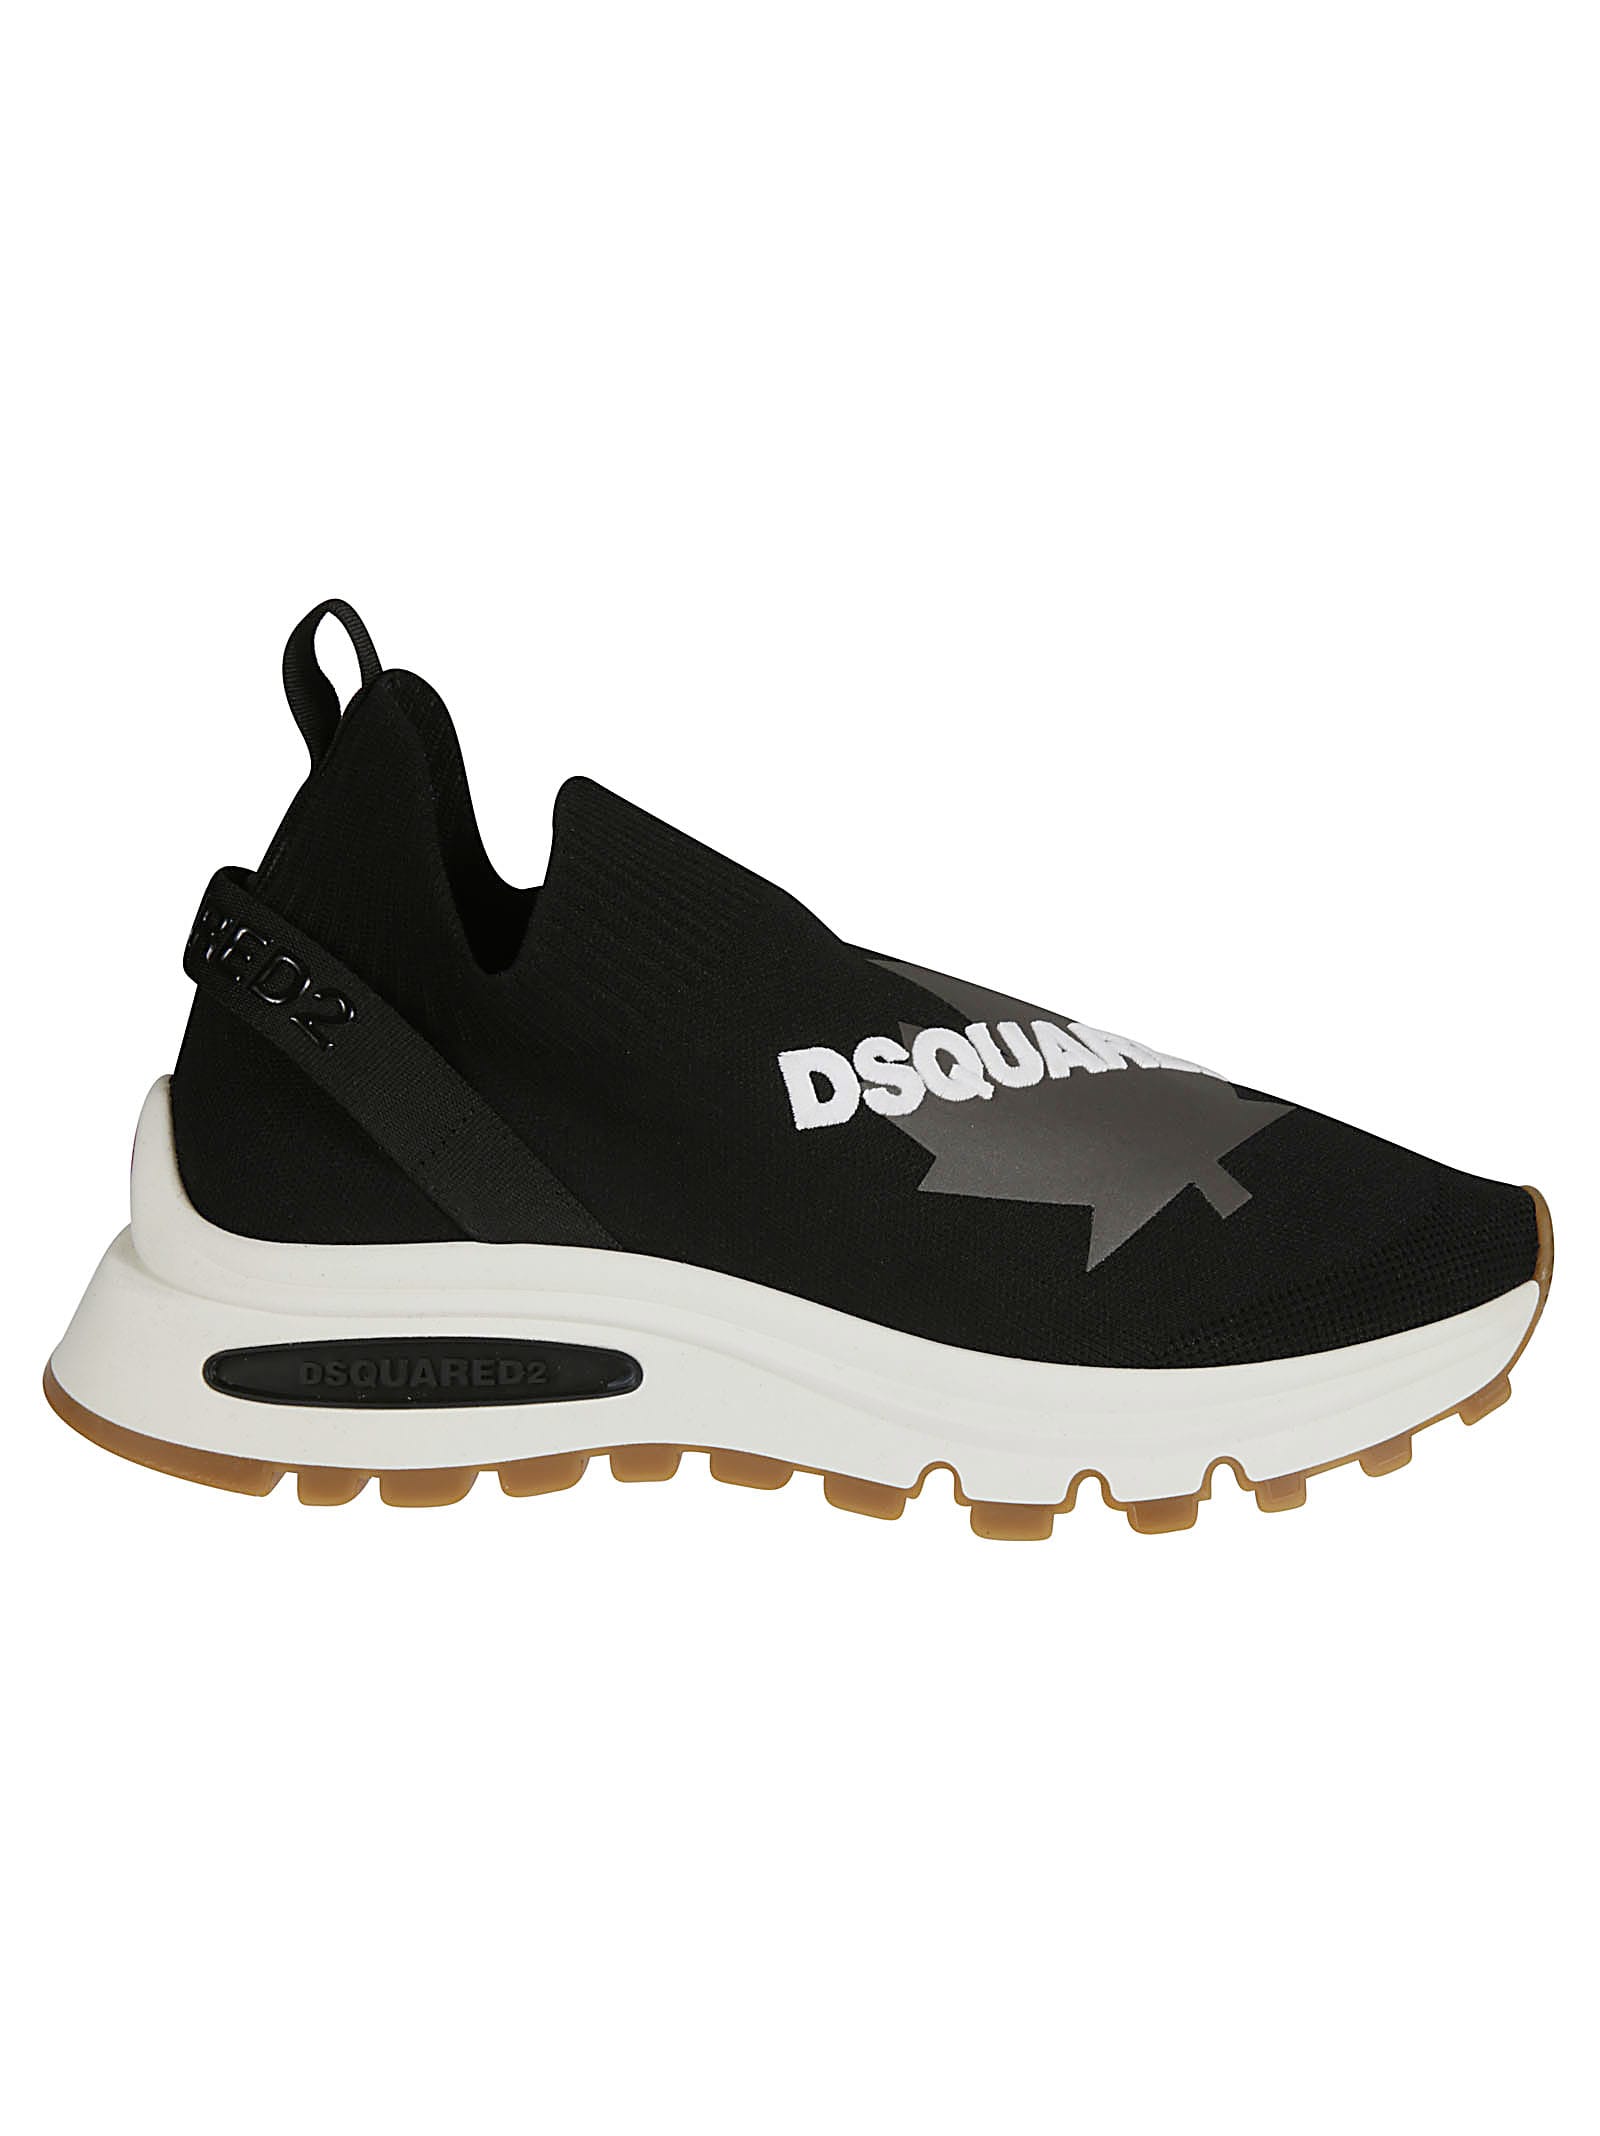 Dsquared2 Maple Leaf Mesh Sneakers